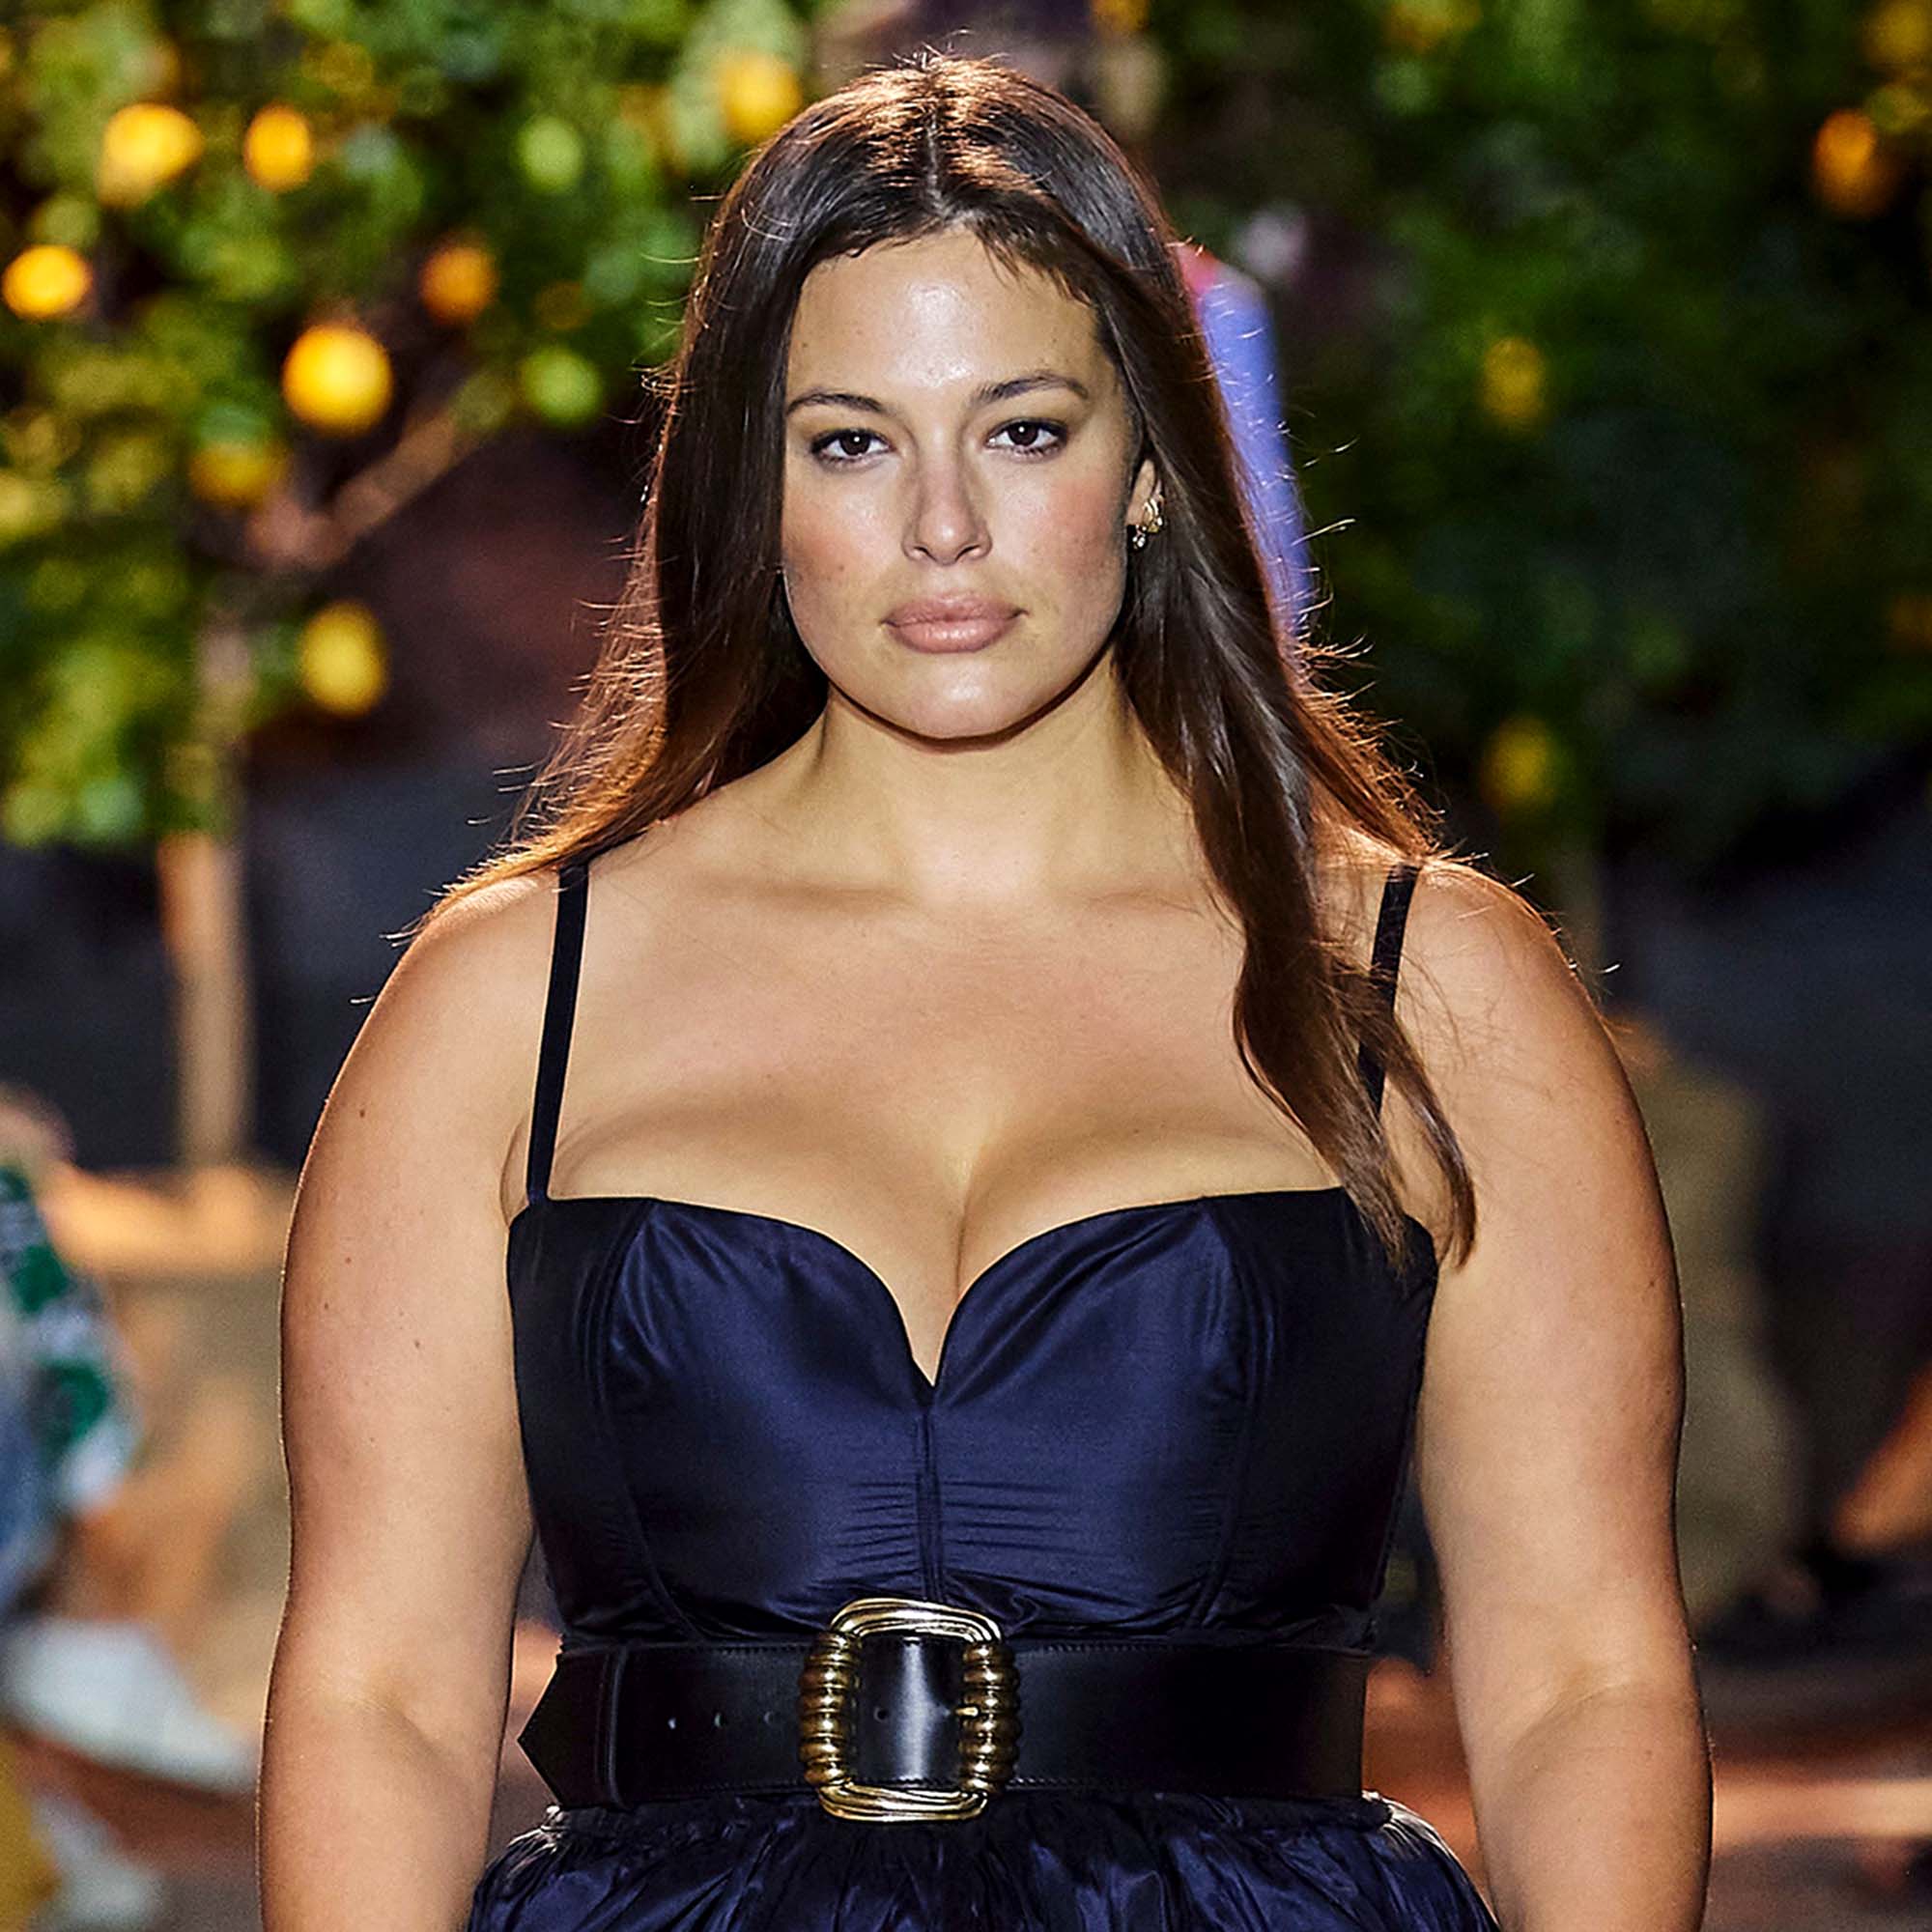 Ashley Graham I Almost Died From Blood Loss After Giving Birth Twins 001 - Male Enhancement Products - What Every Man Must Know Before Trying the Product